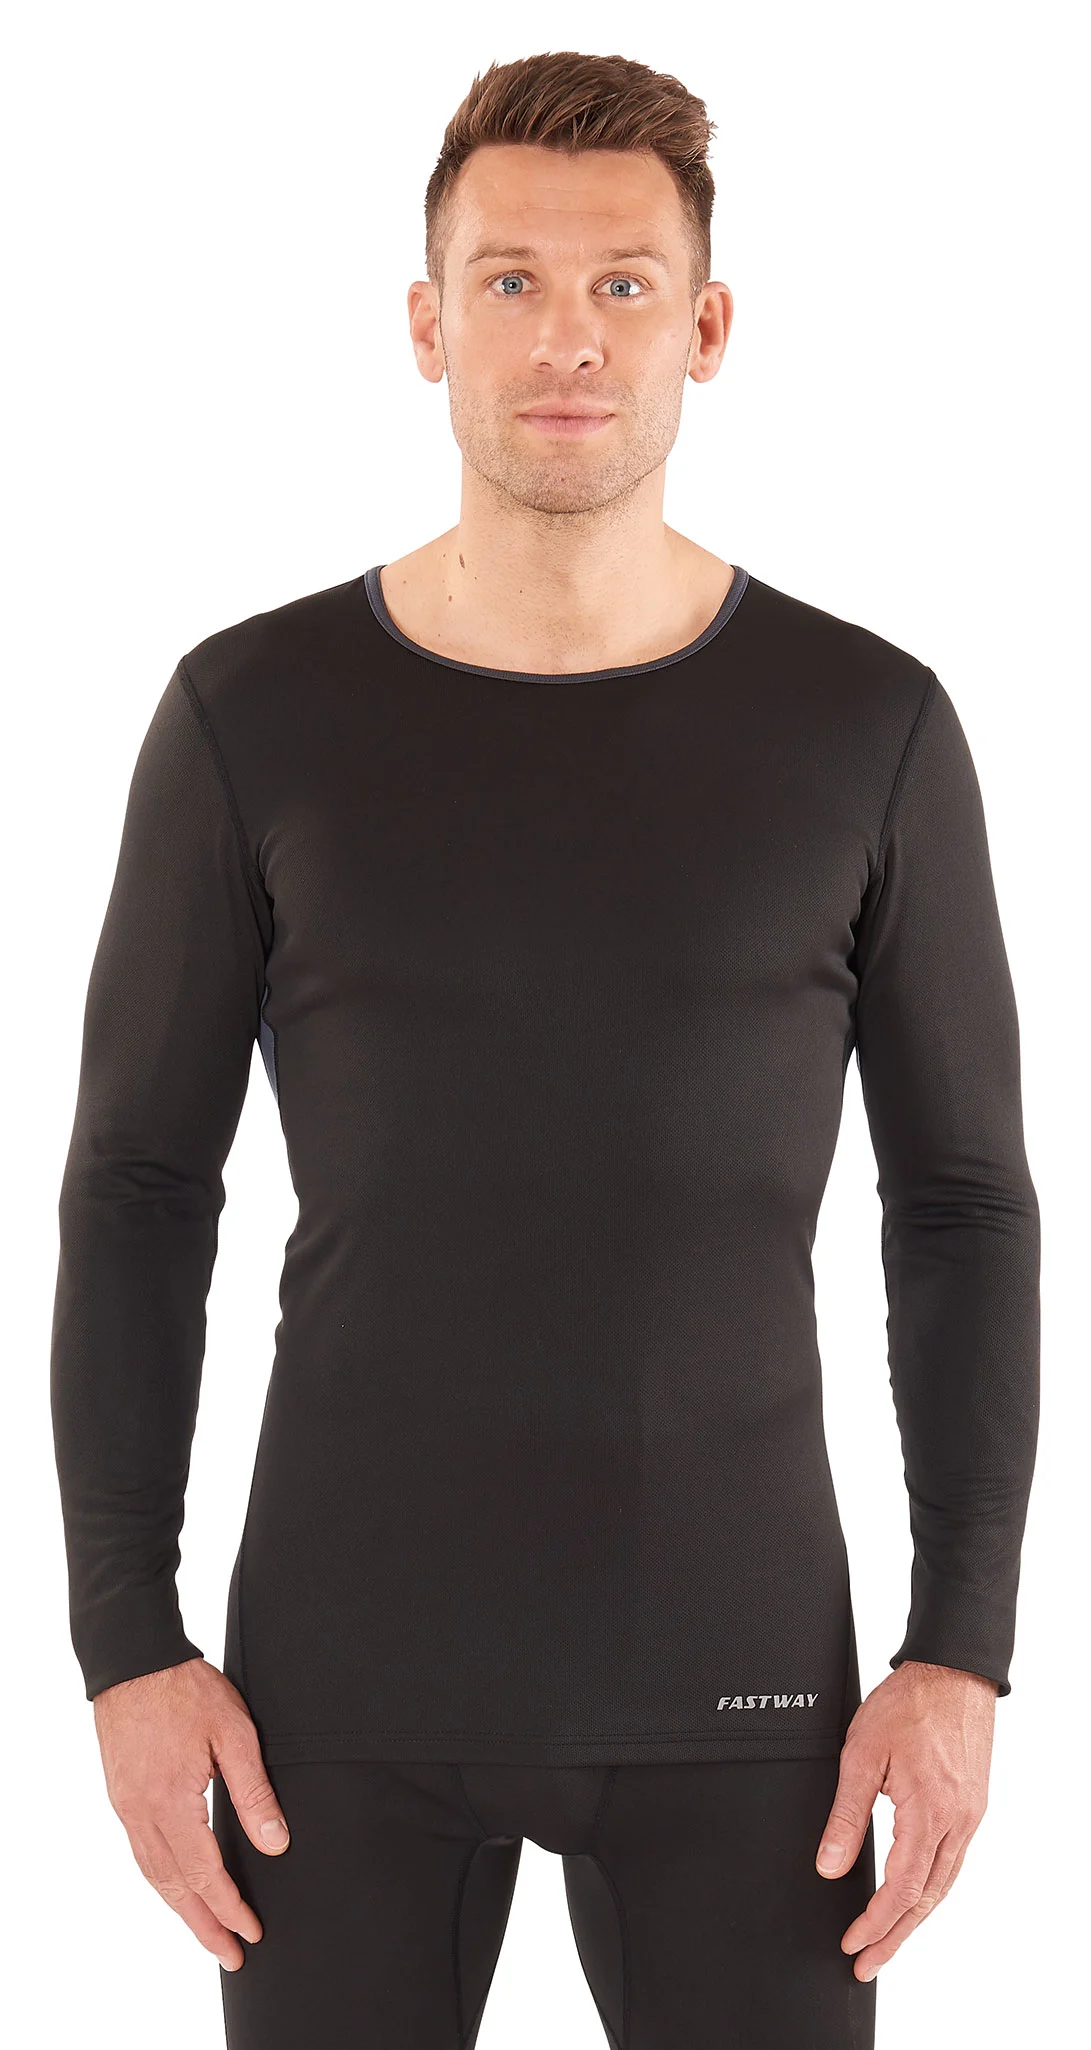 Fastway Fastway Coolmax Base Layer Shirt low-cost